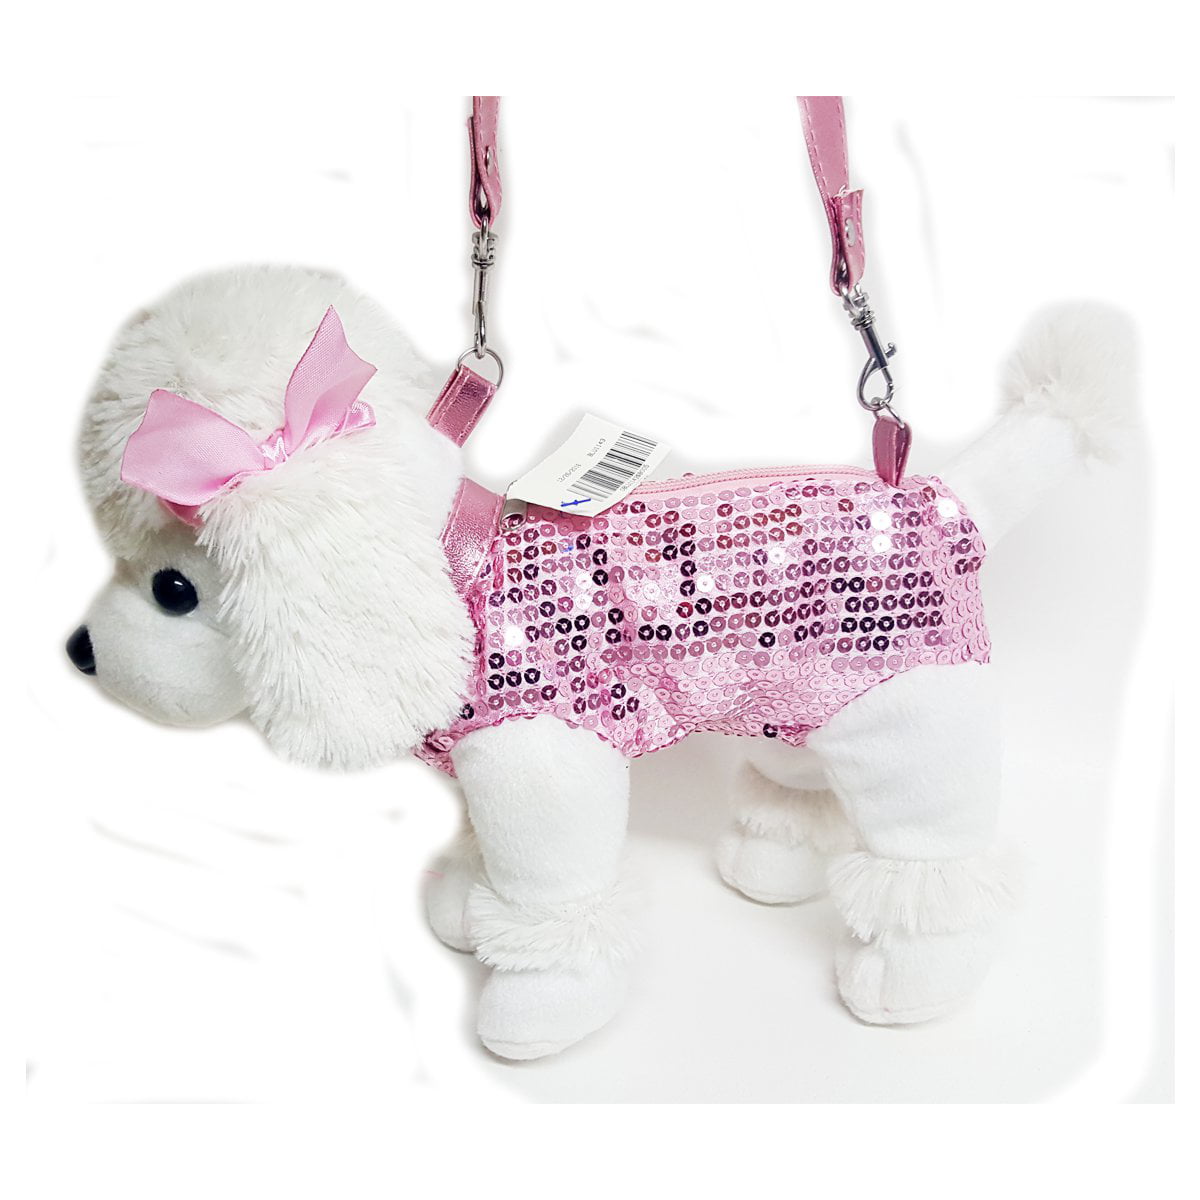 Poochie & Co. White Poodle Girls' Plush Dog Purse Pink Sequins 